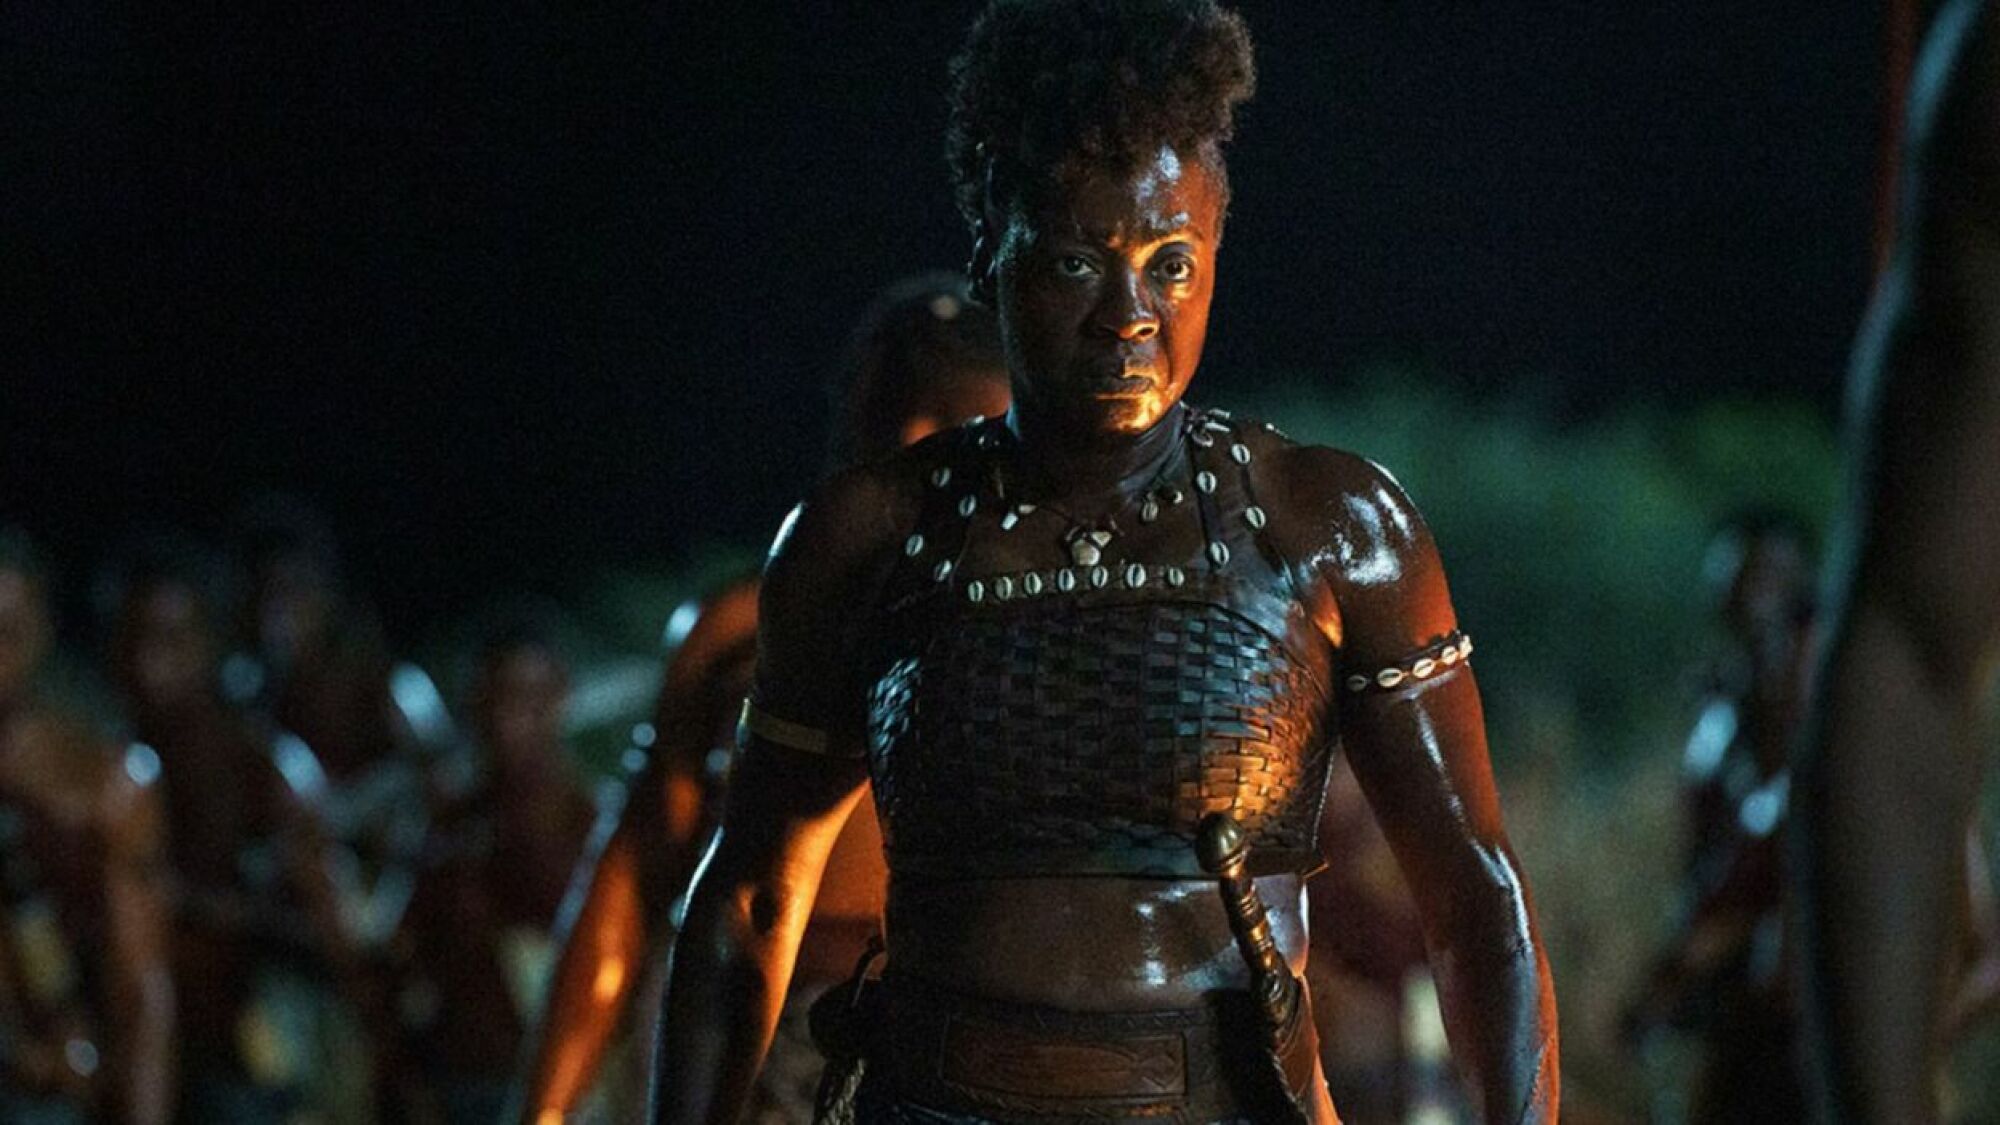 Viola Davis has come to kick ass and bring to life the story of the Agojie. 